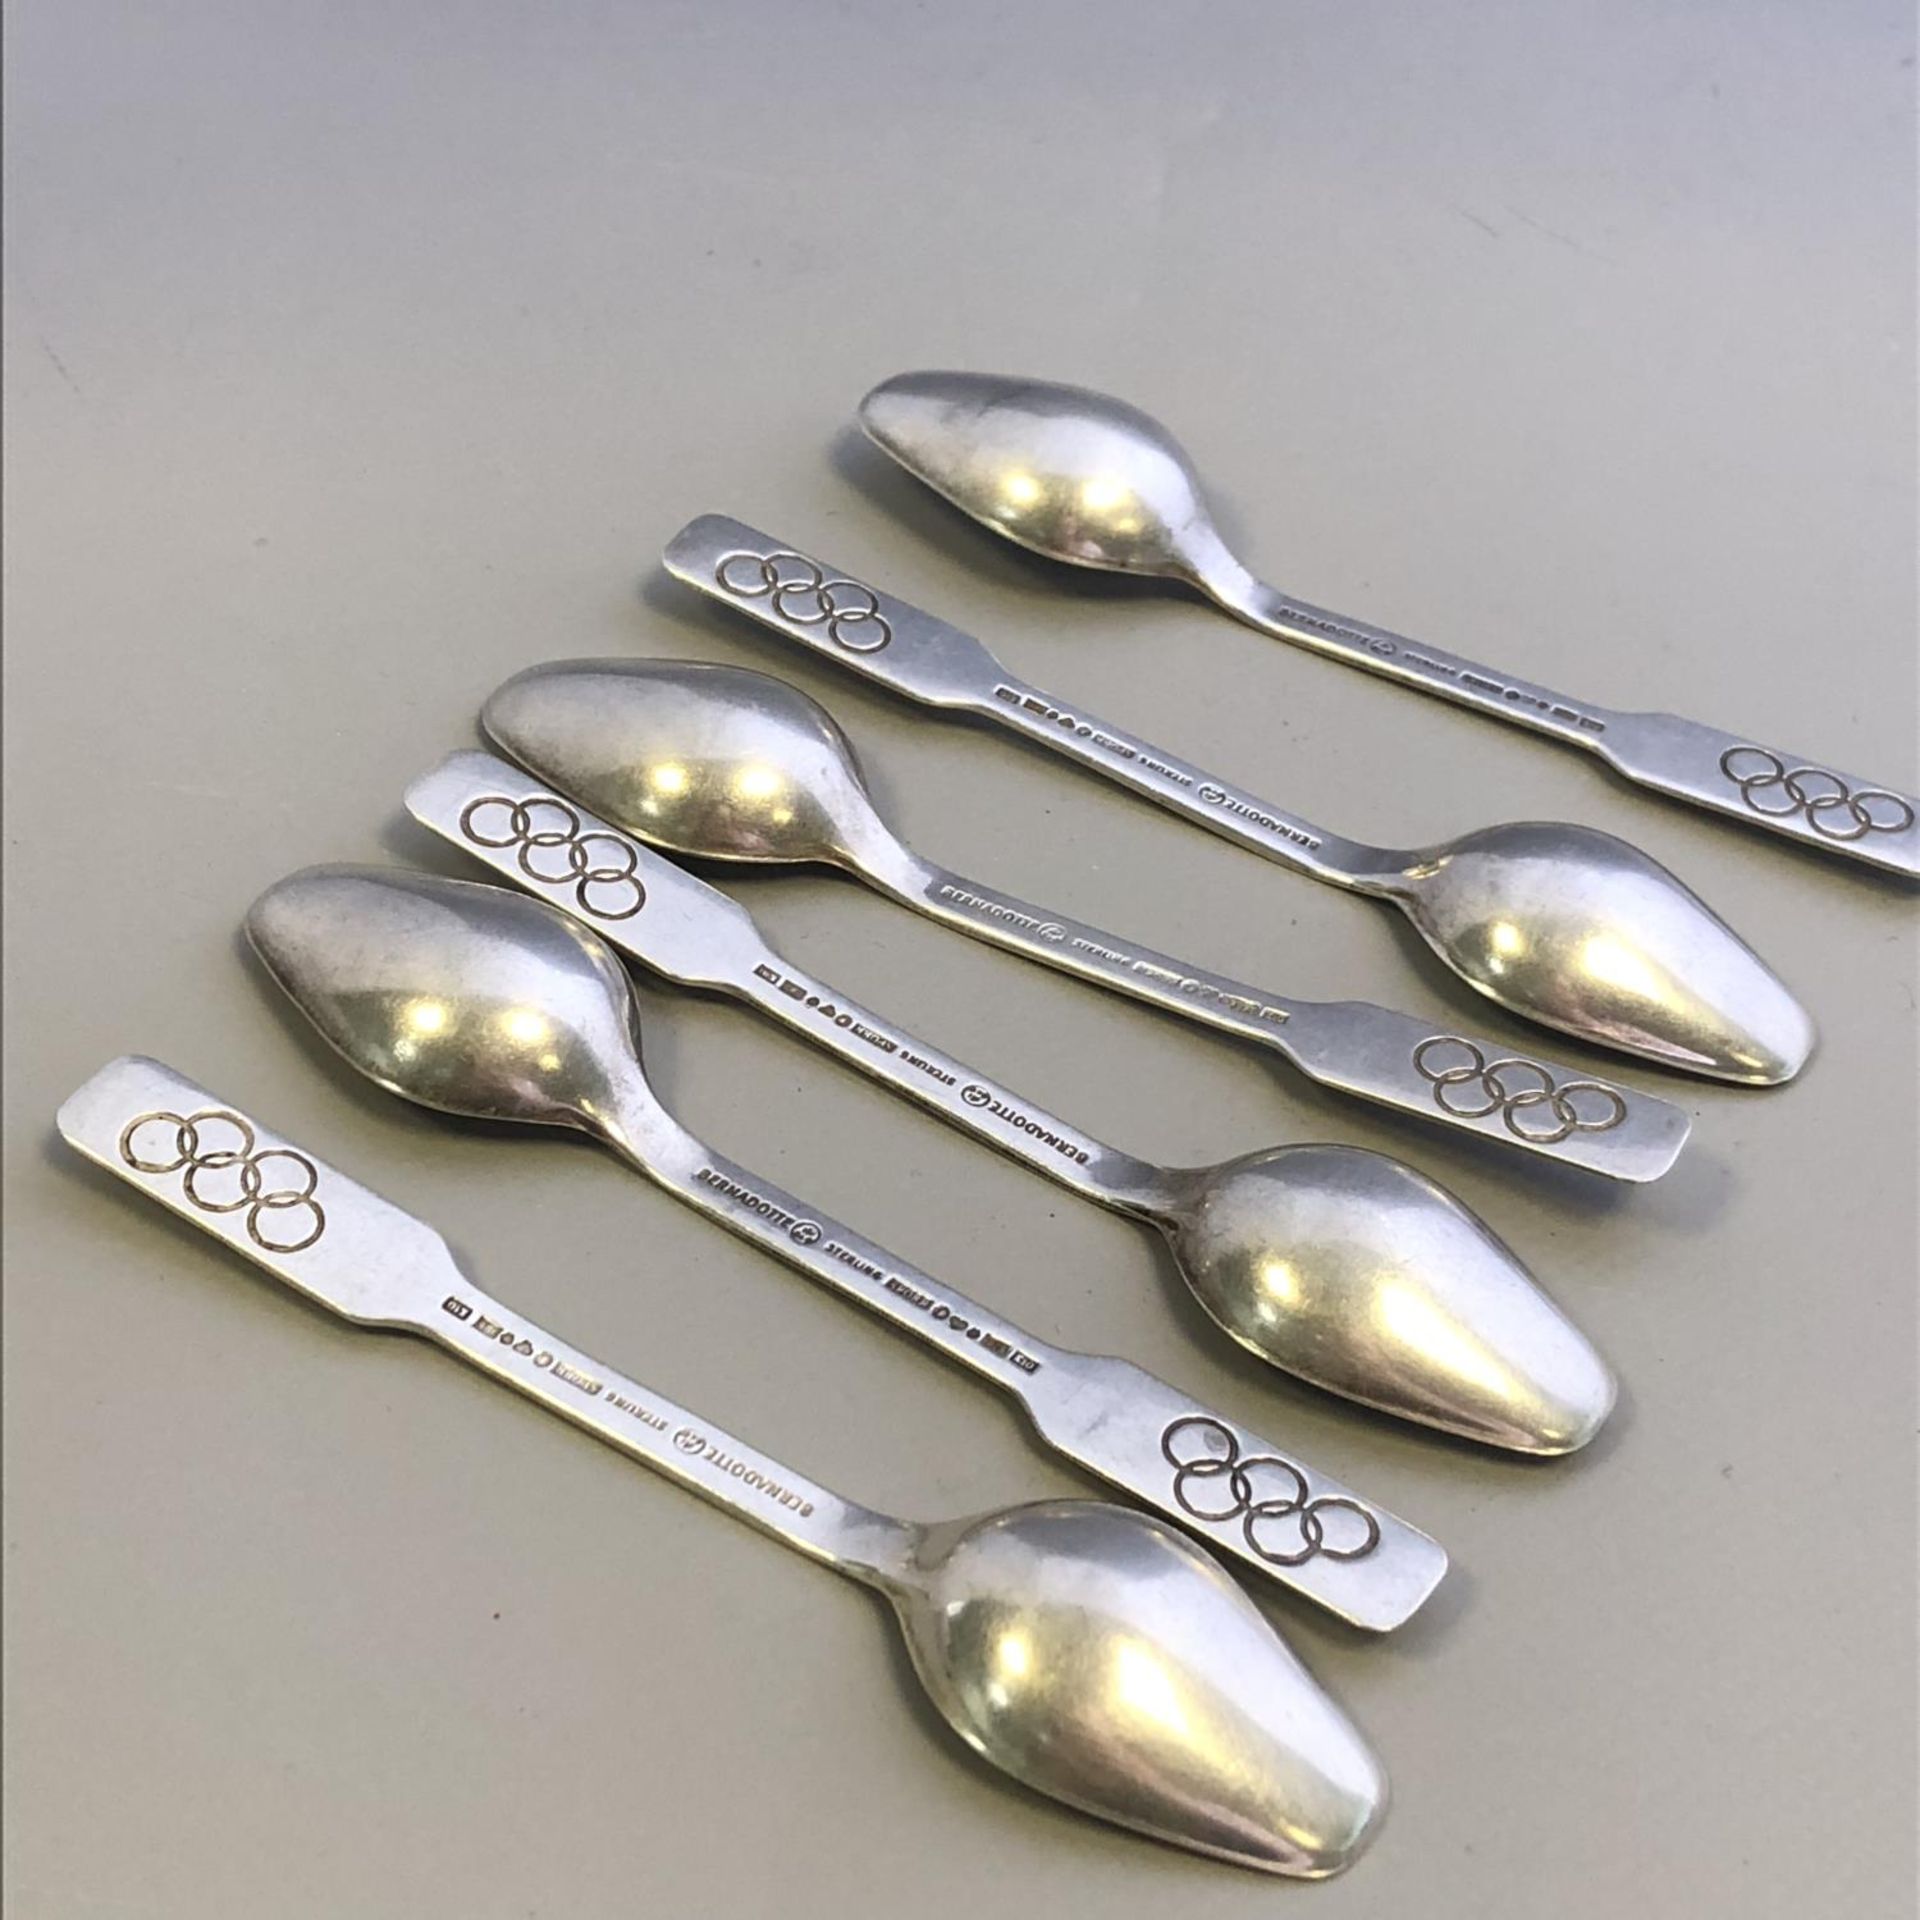 Set of 6 Sterling Silver Modernist Spoons with Olympic Rings to Handles - Sweden - Image 2 of 2